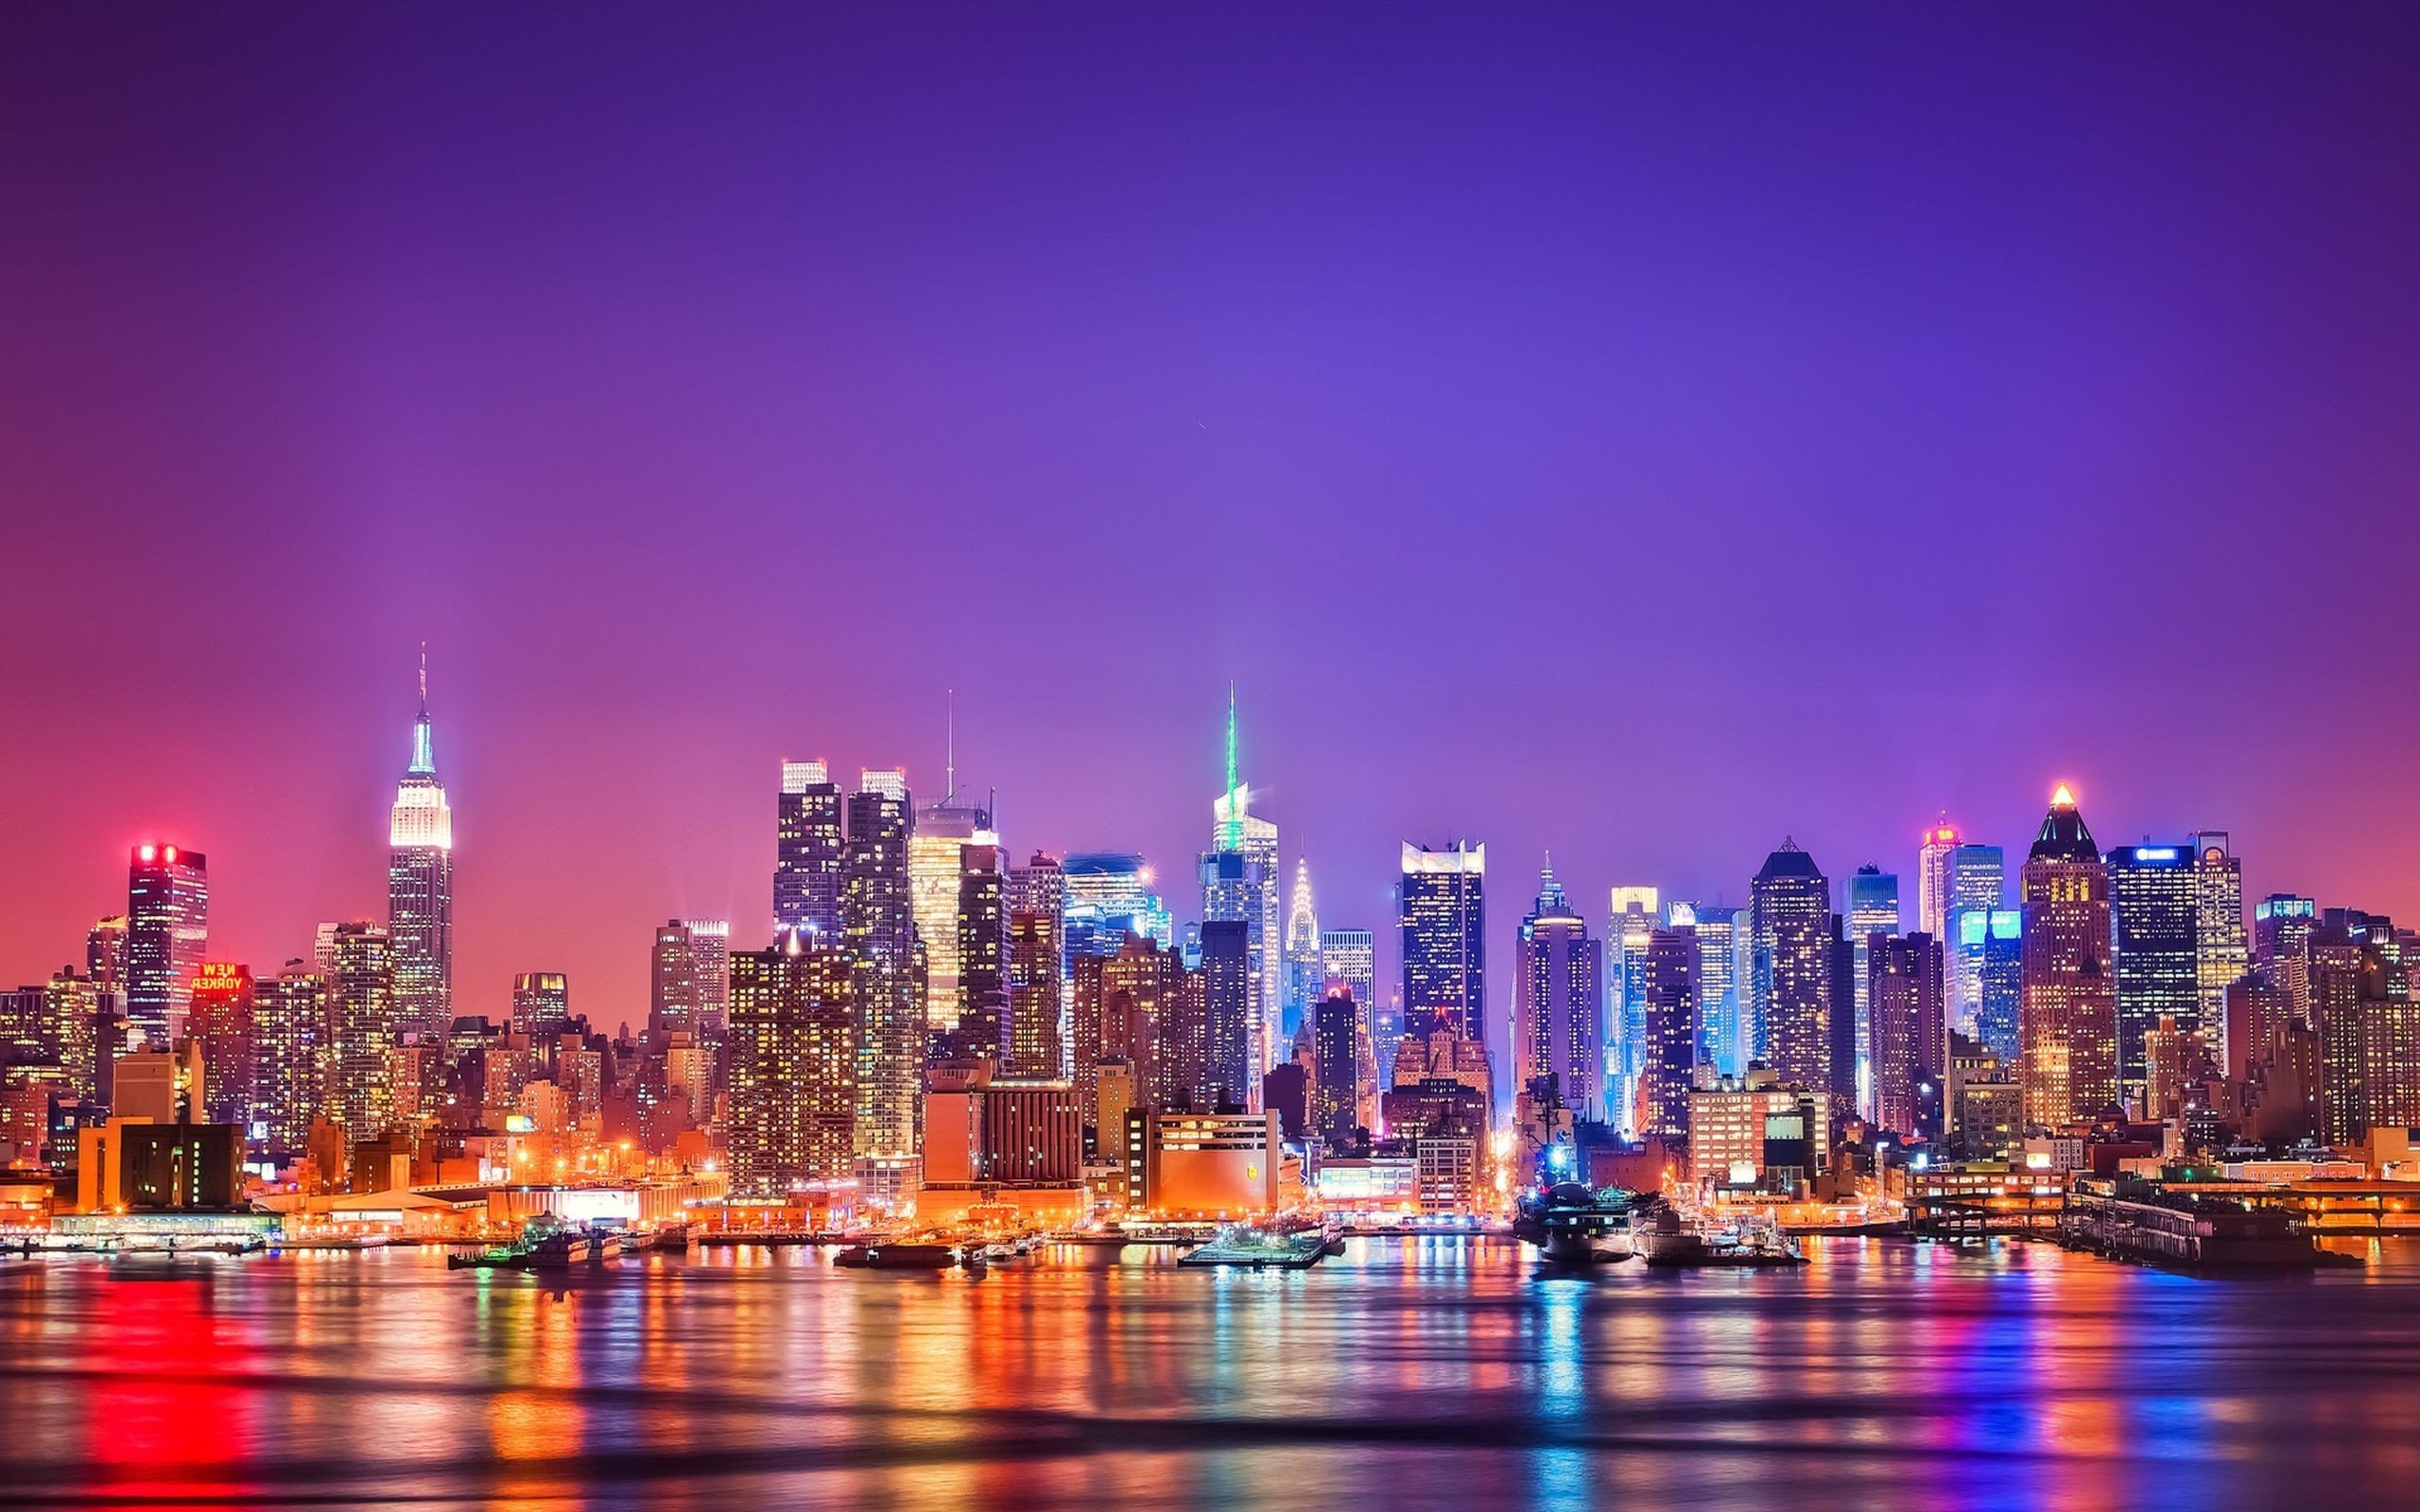 Free download Beautiful New York City Light at Night Wallpaper in 2560x1600